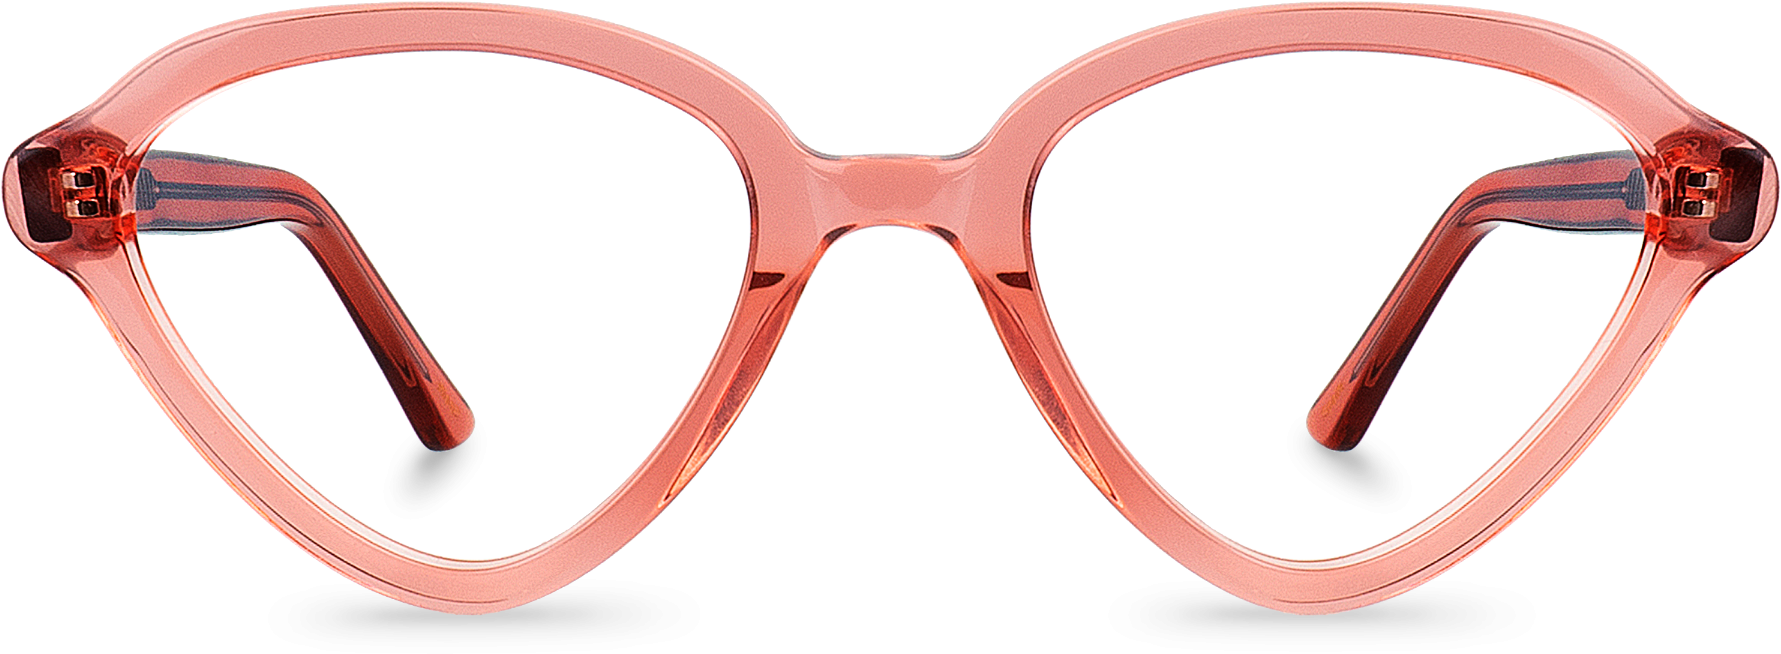 Front View Of Spade Oval Glasses Made From Pink Metal - Plastic (1800x1200), Png Download